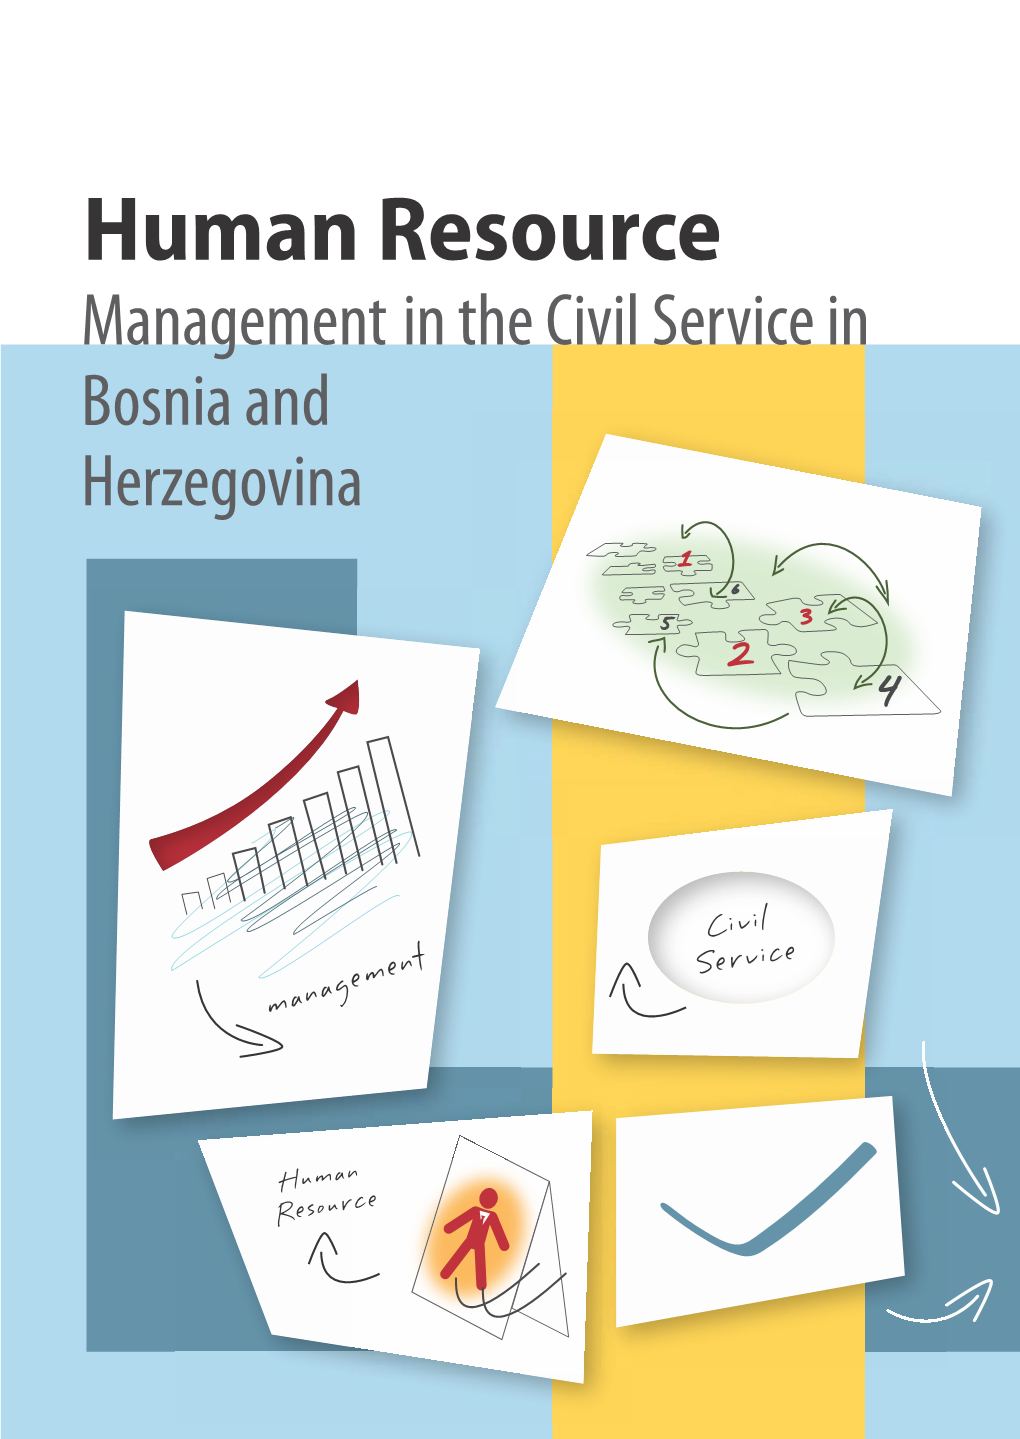 Human Resources Management in the Civil Service In